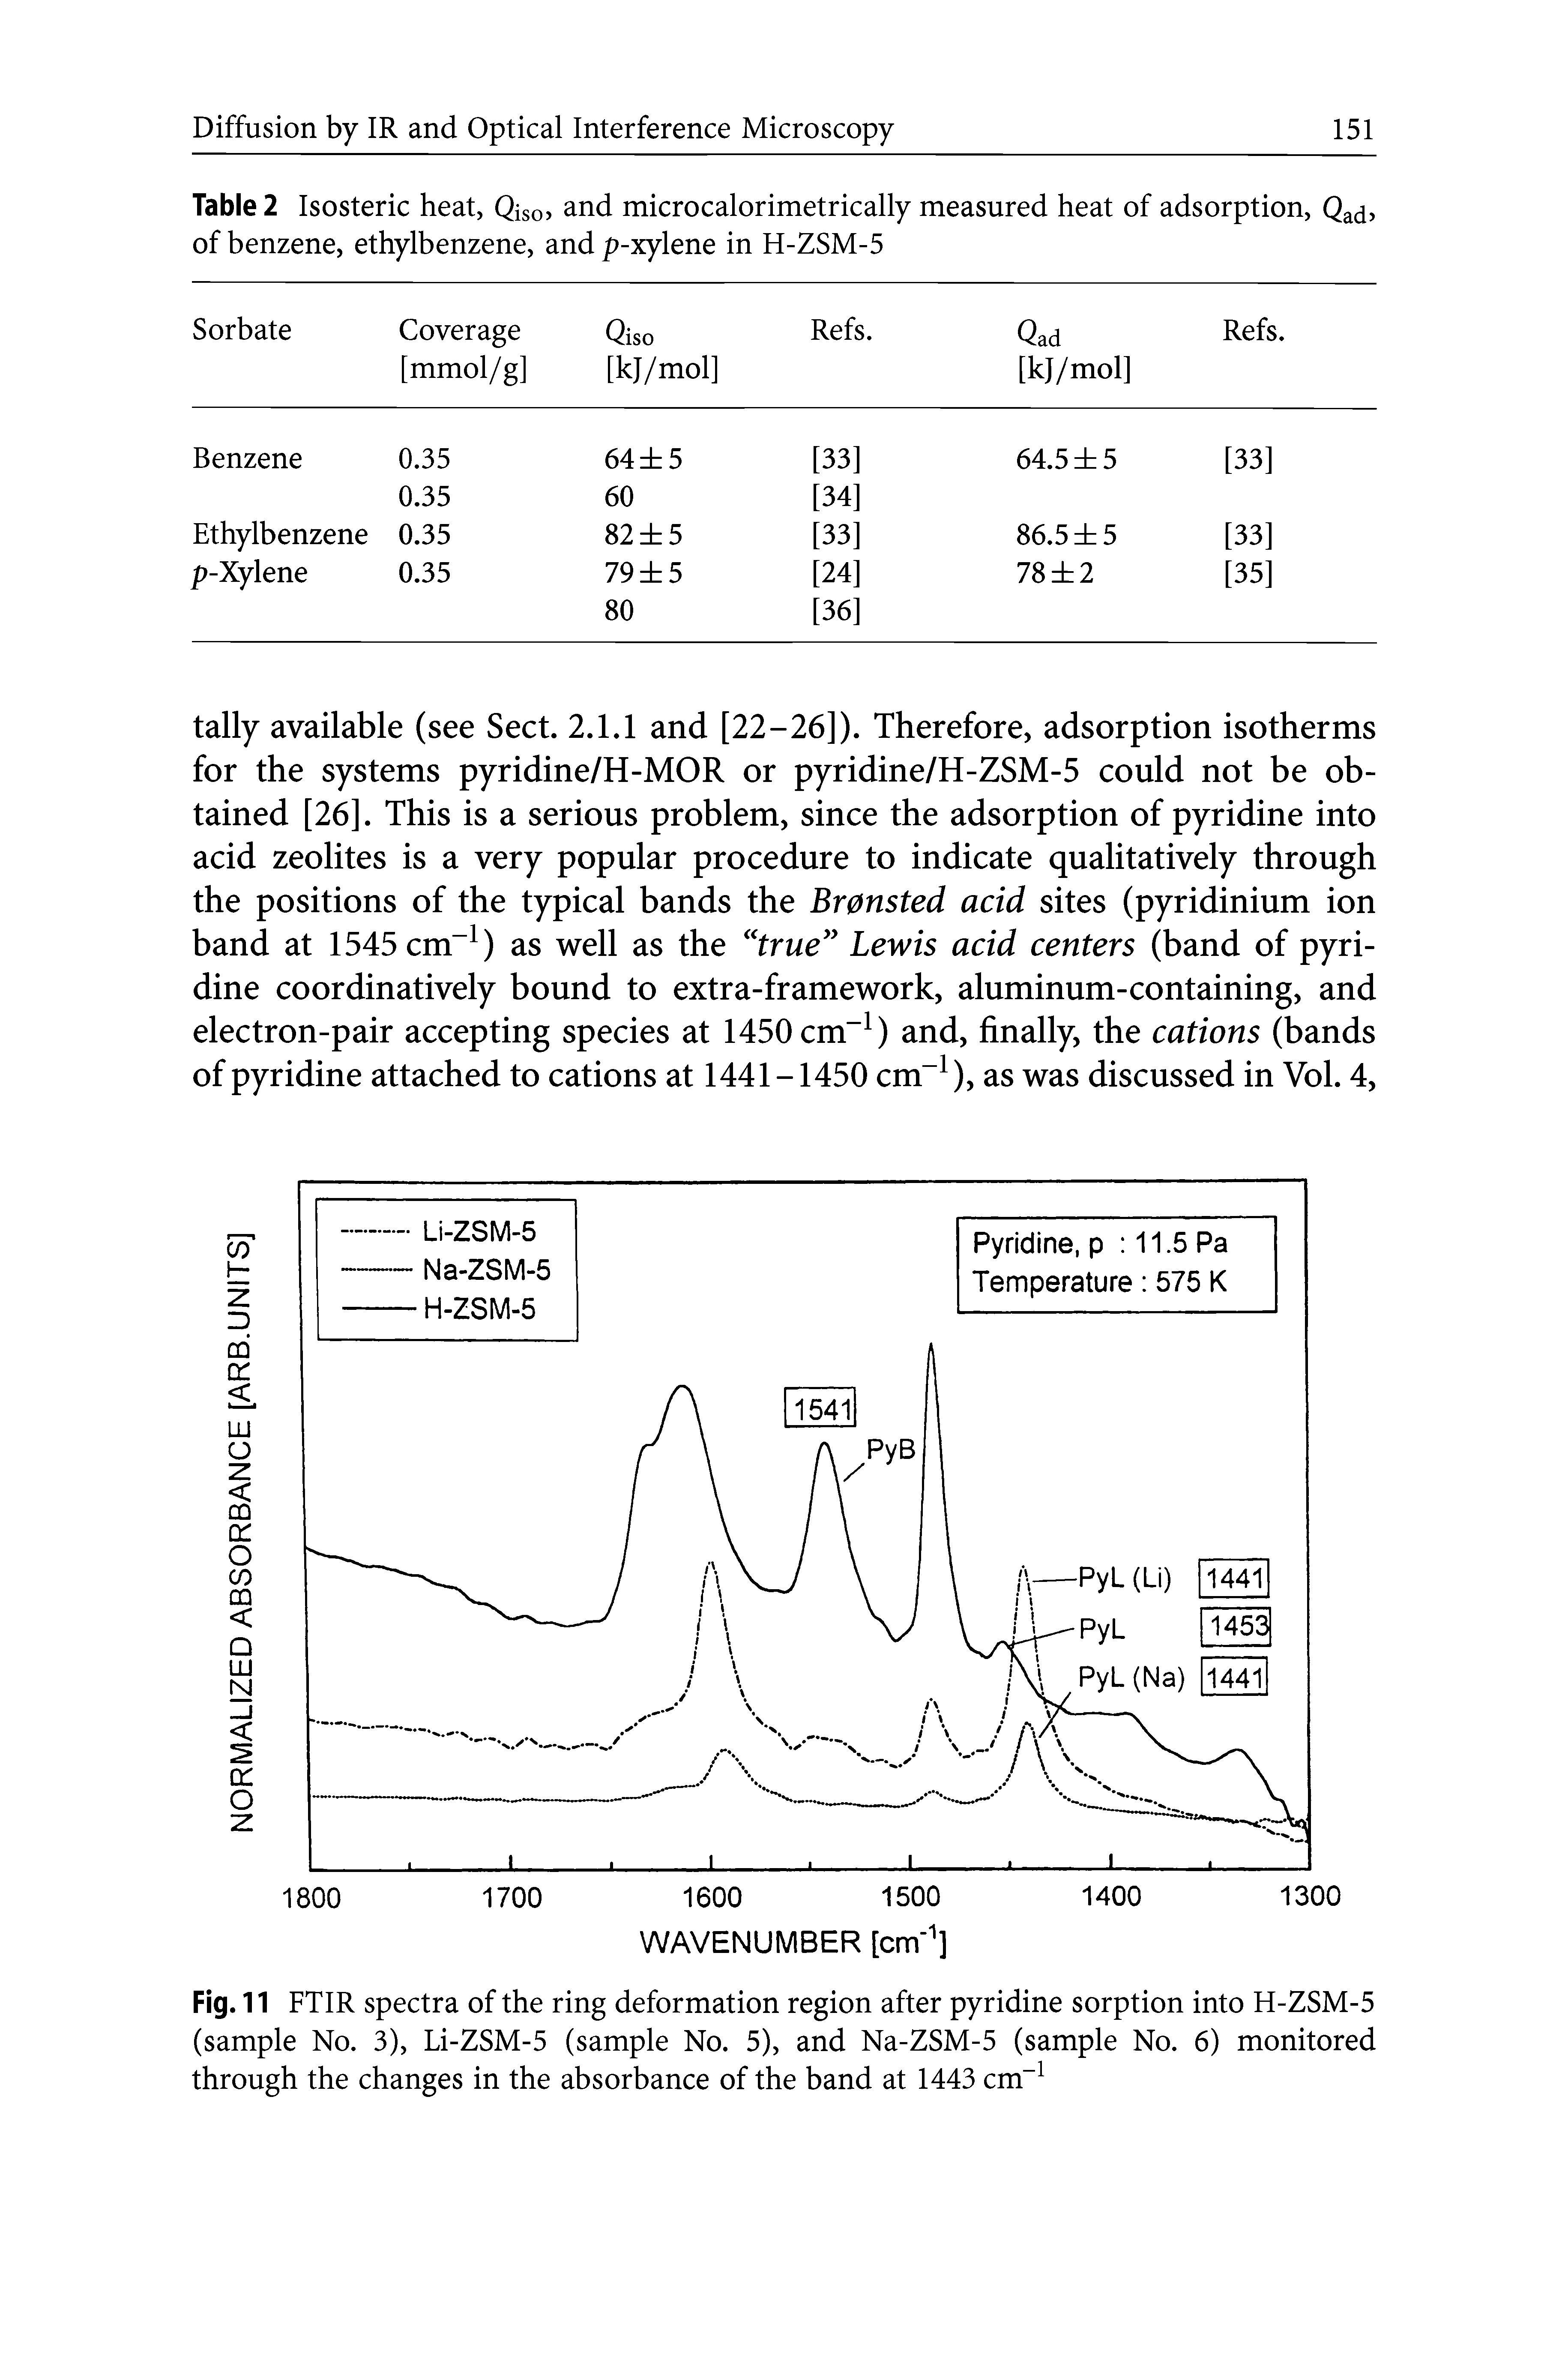 Fig. 11 FTIR spectra of the ring deformation region after pyridine sorption into H-ZSM-5 (sample No. 3), Li-ZSM-5 (sample No. 5), and Na-ZSM-5 (sample No. 6) monitored through the changes in the absorbance of the band at 1443 cm ...